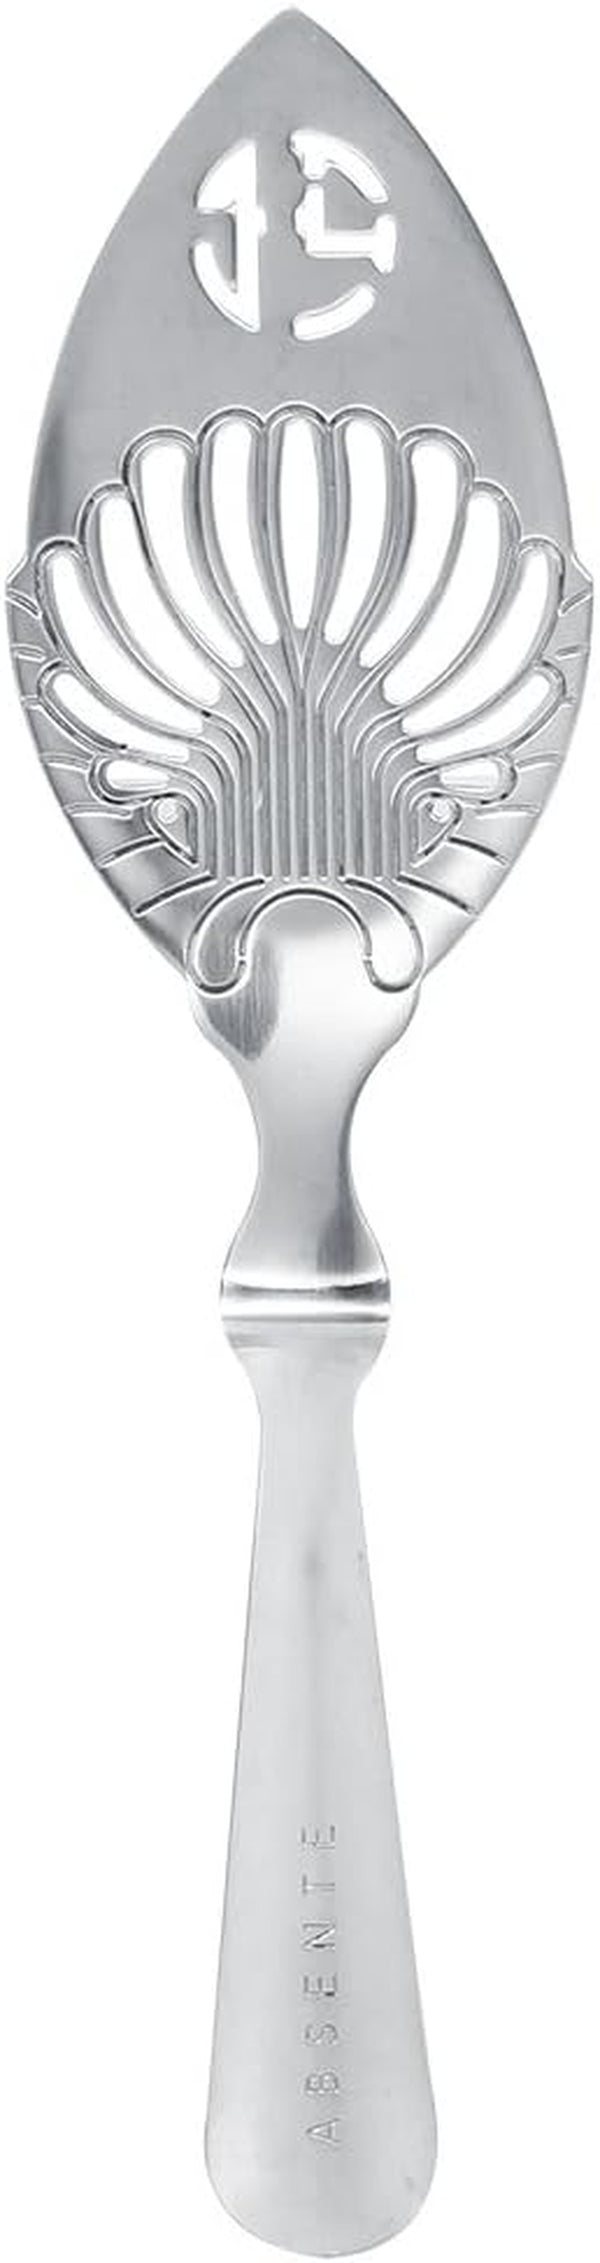 Absinthe Spoon - 304 Stainless Steel Absinthe Spoon Strainers Drinking Spoons Cocktail Bar Glass Cup Drinking Filter Wormwood Spoon